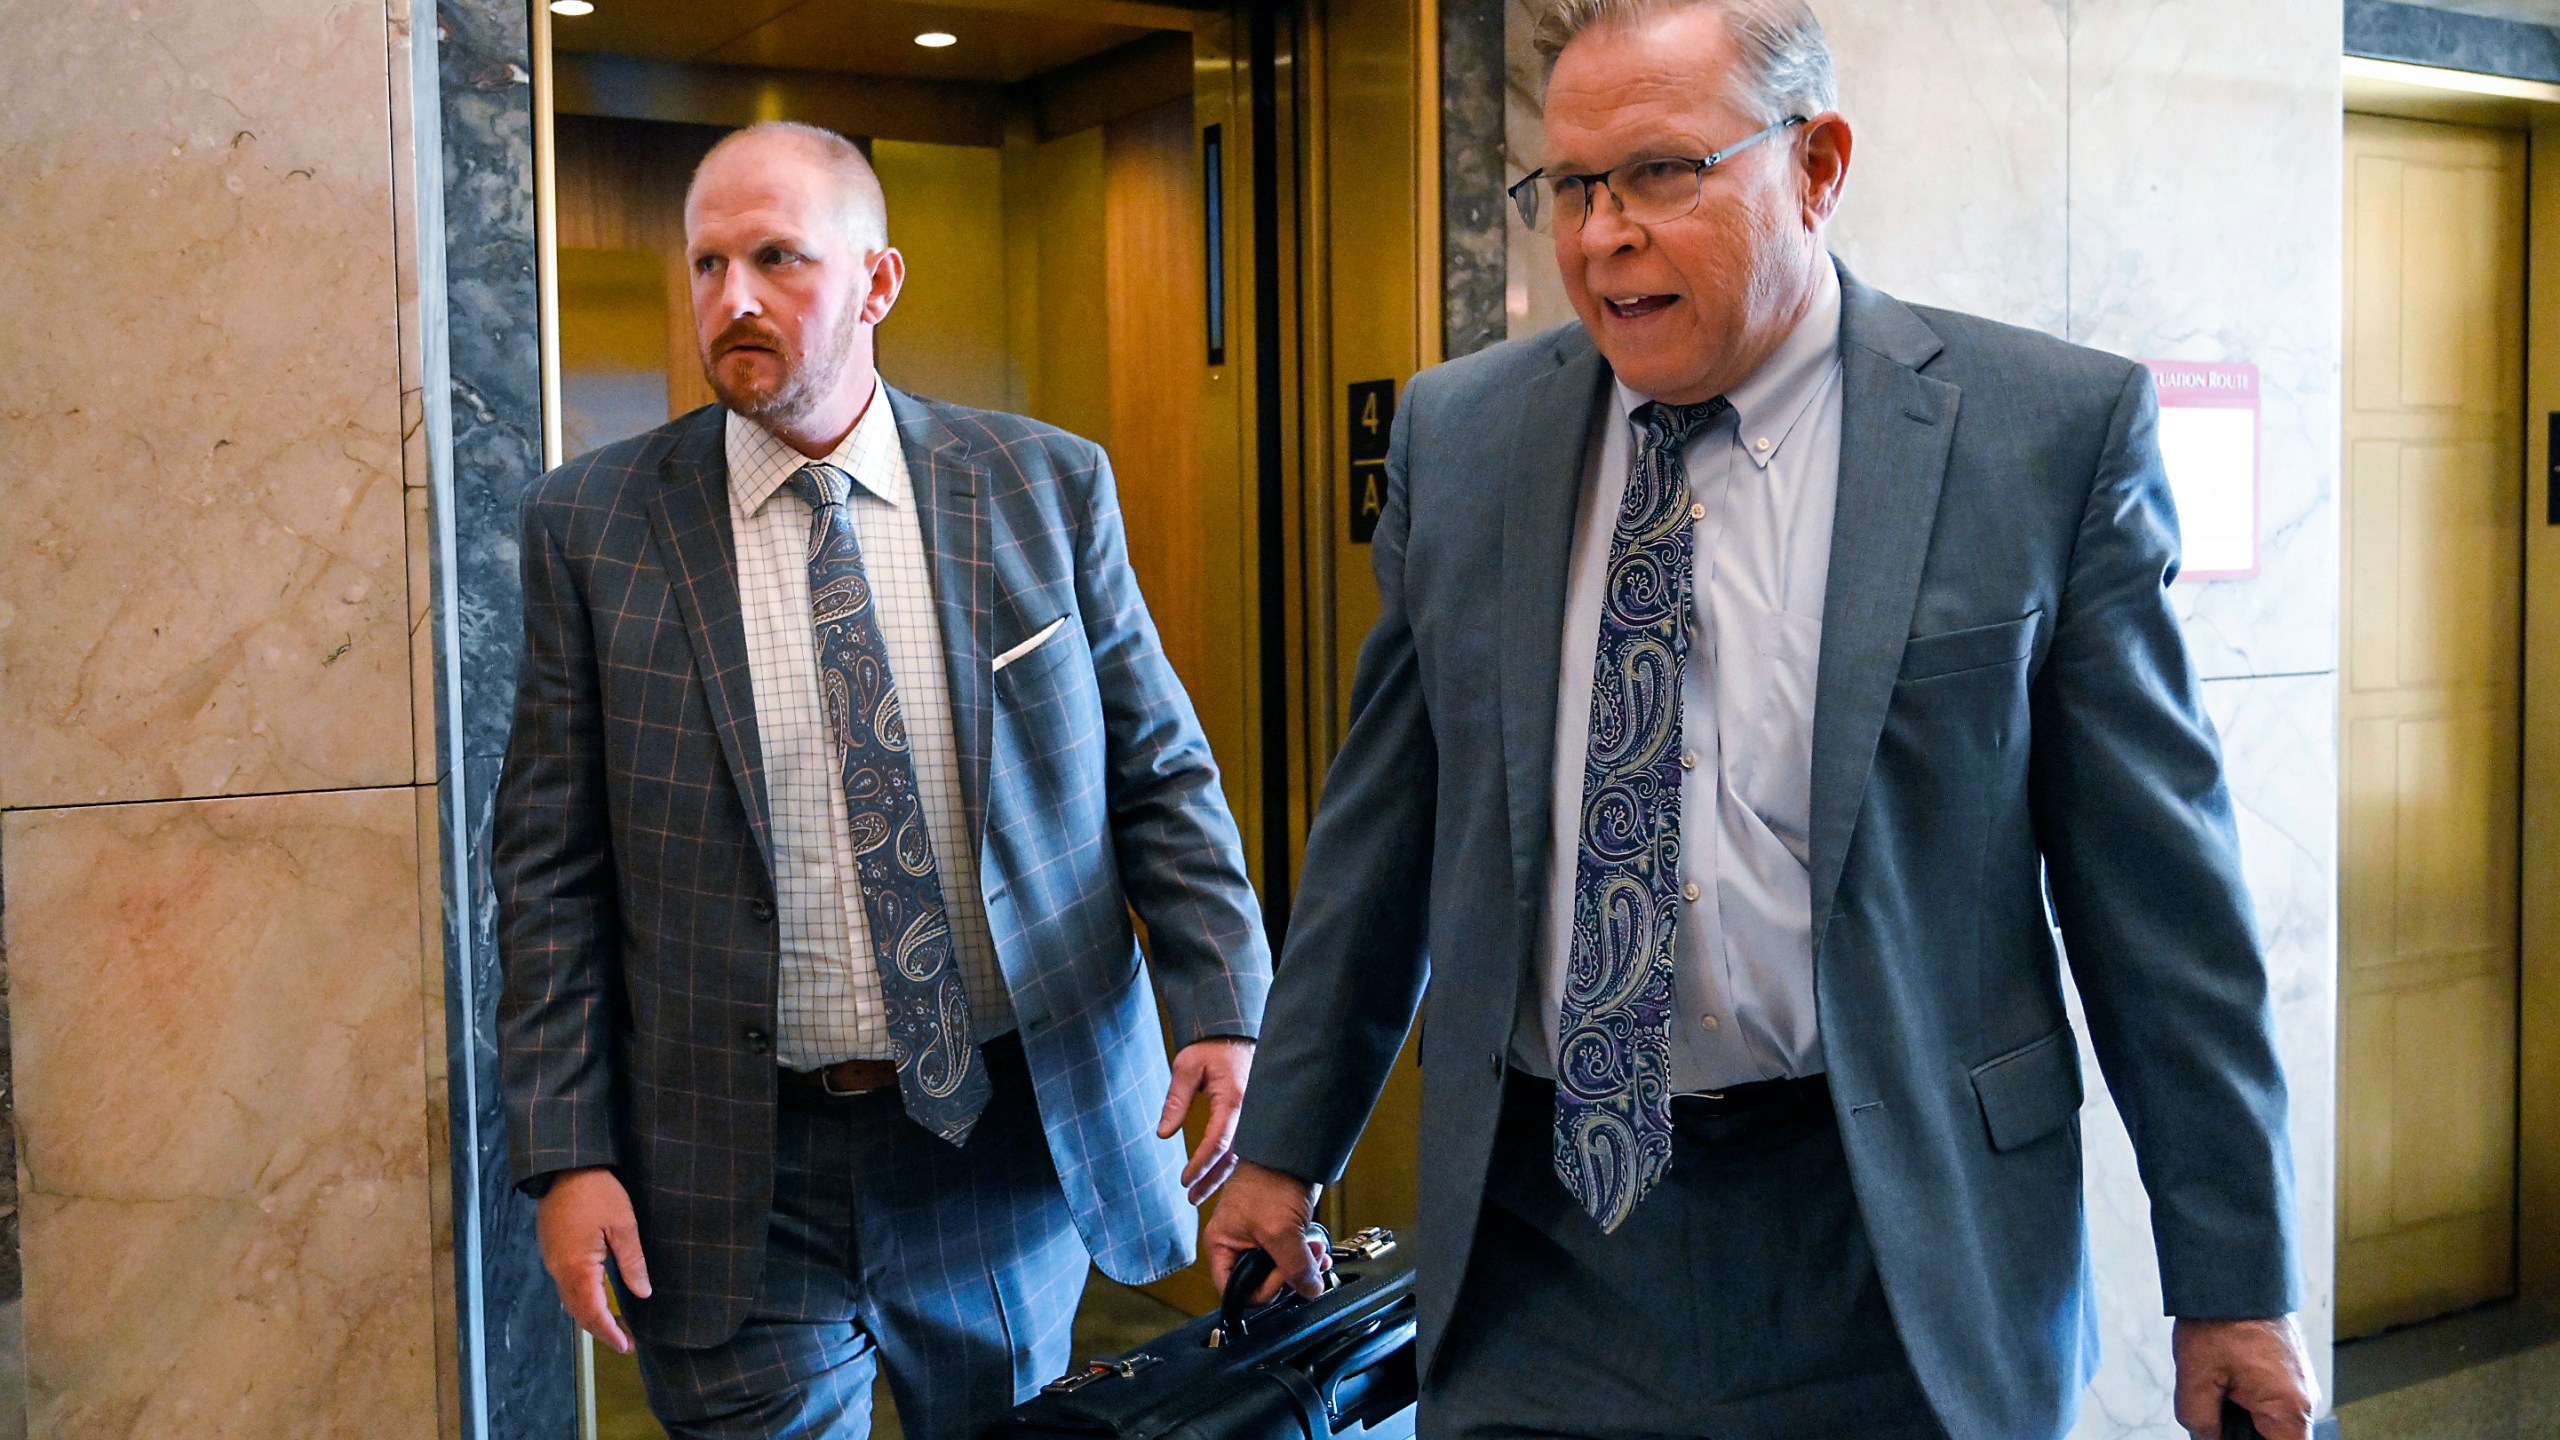 FILE - Britt Reid, left, walks to a courtroom with his attorney J.R. Hobbs, right, Tuesday, Nov. 1, 2022, at the Jackson County Courthouse, in Kansas City, Mo. Facing a flurry of outrage over the decision to shorten the prison sentence of former Kansas City Chiefs assistant coach Britt Reid, Missouri Gov. Mike Parson offered “deepest sympathy” to the family of a 5-year-old girl who was seriously injured in a drunken driving crash. But Parson stopped short of apologizing in a statement Tuesday, March 5, 2024, to The Kansas City Star for his decision last week to commute the remainder of Reid’s three-year prison sentence to house arrest, subject to several conditions. (Tammy Ljungblad/The Kansas City Star via AP, File)